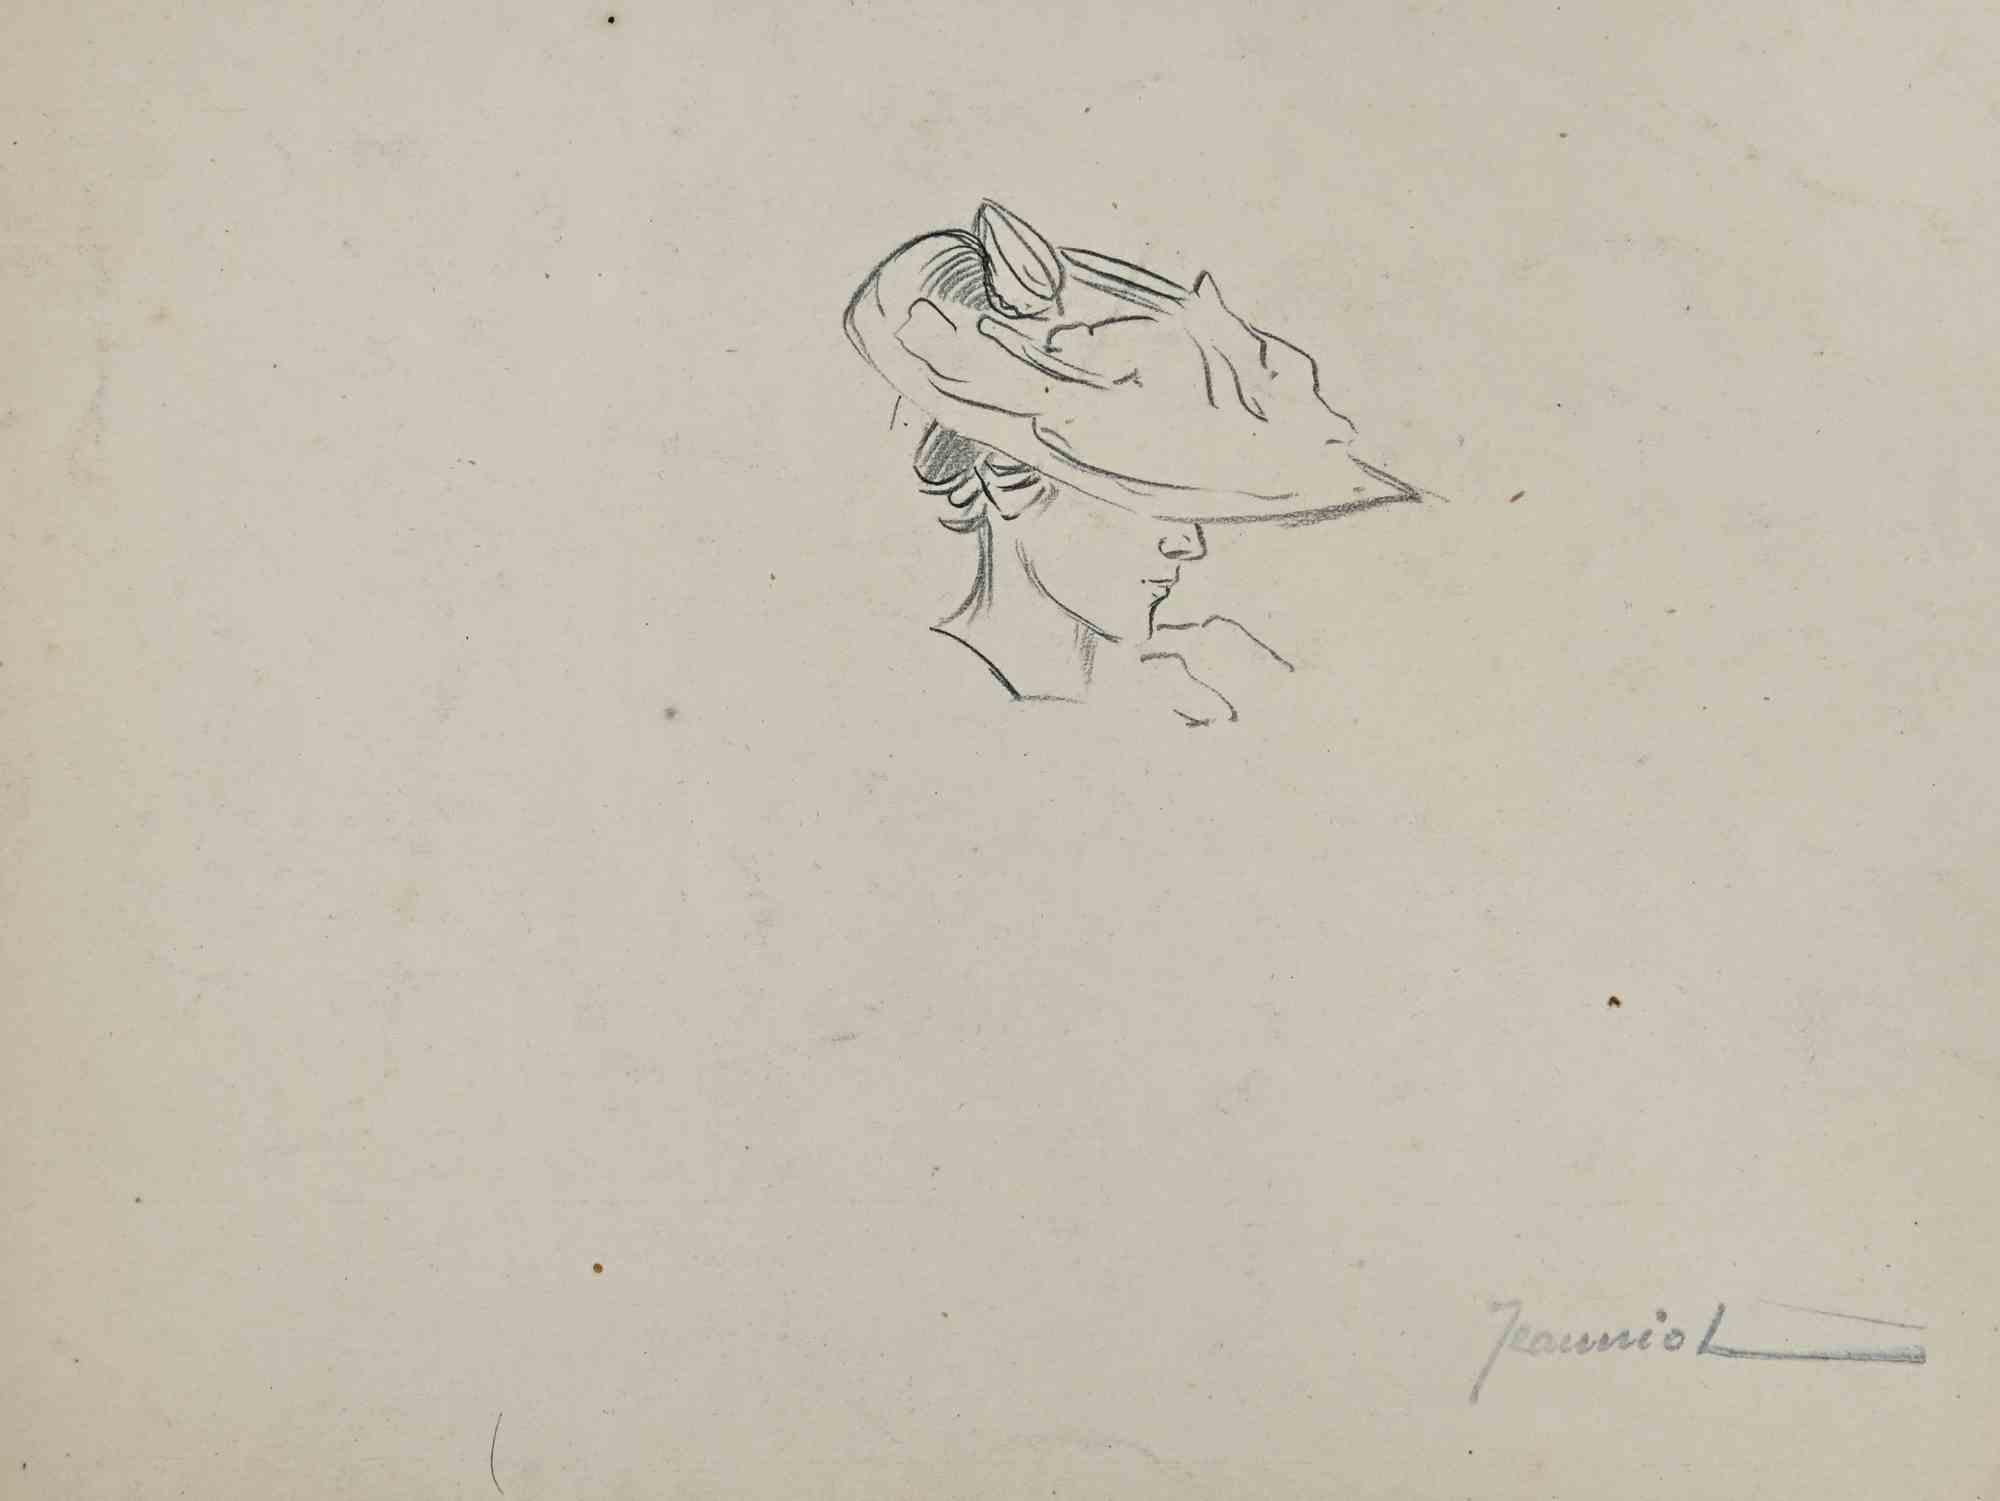 Portrait is an original Drawing on paper realized by the painter Pierre Georges Jeanniot (1848-1934).

Drawing in Pencil.

Hand-signed on the lower.

Good conditions except for aged margins.

The artwork is represented through deft and quick strokes